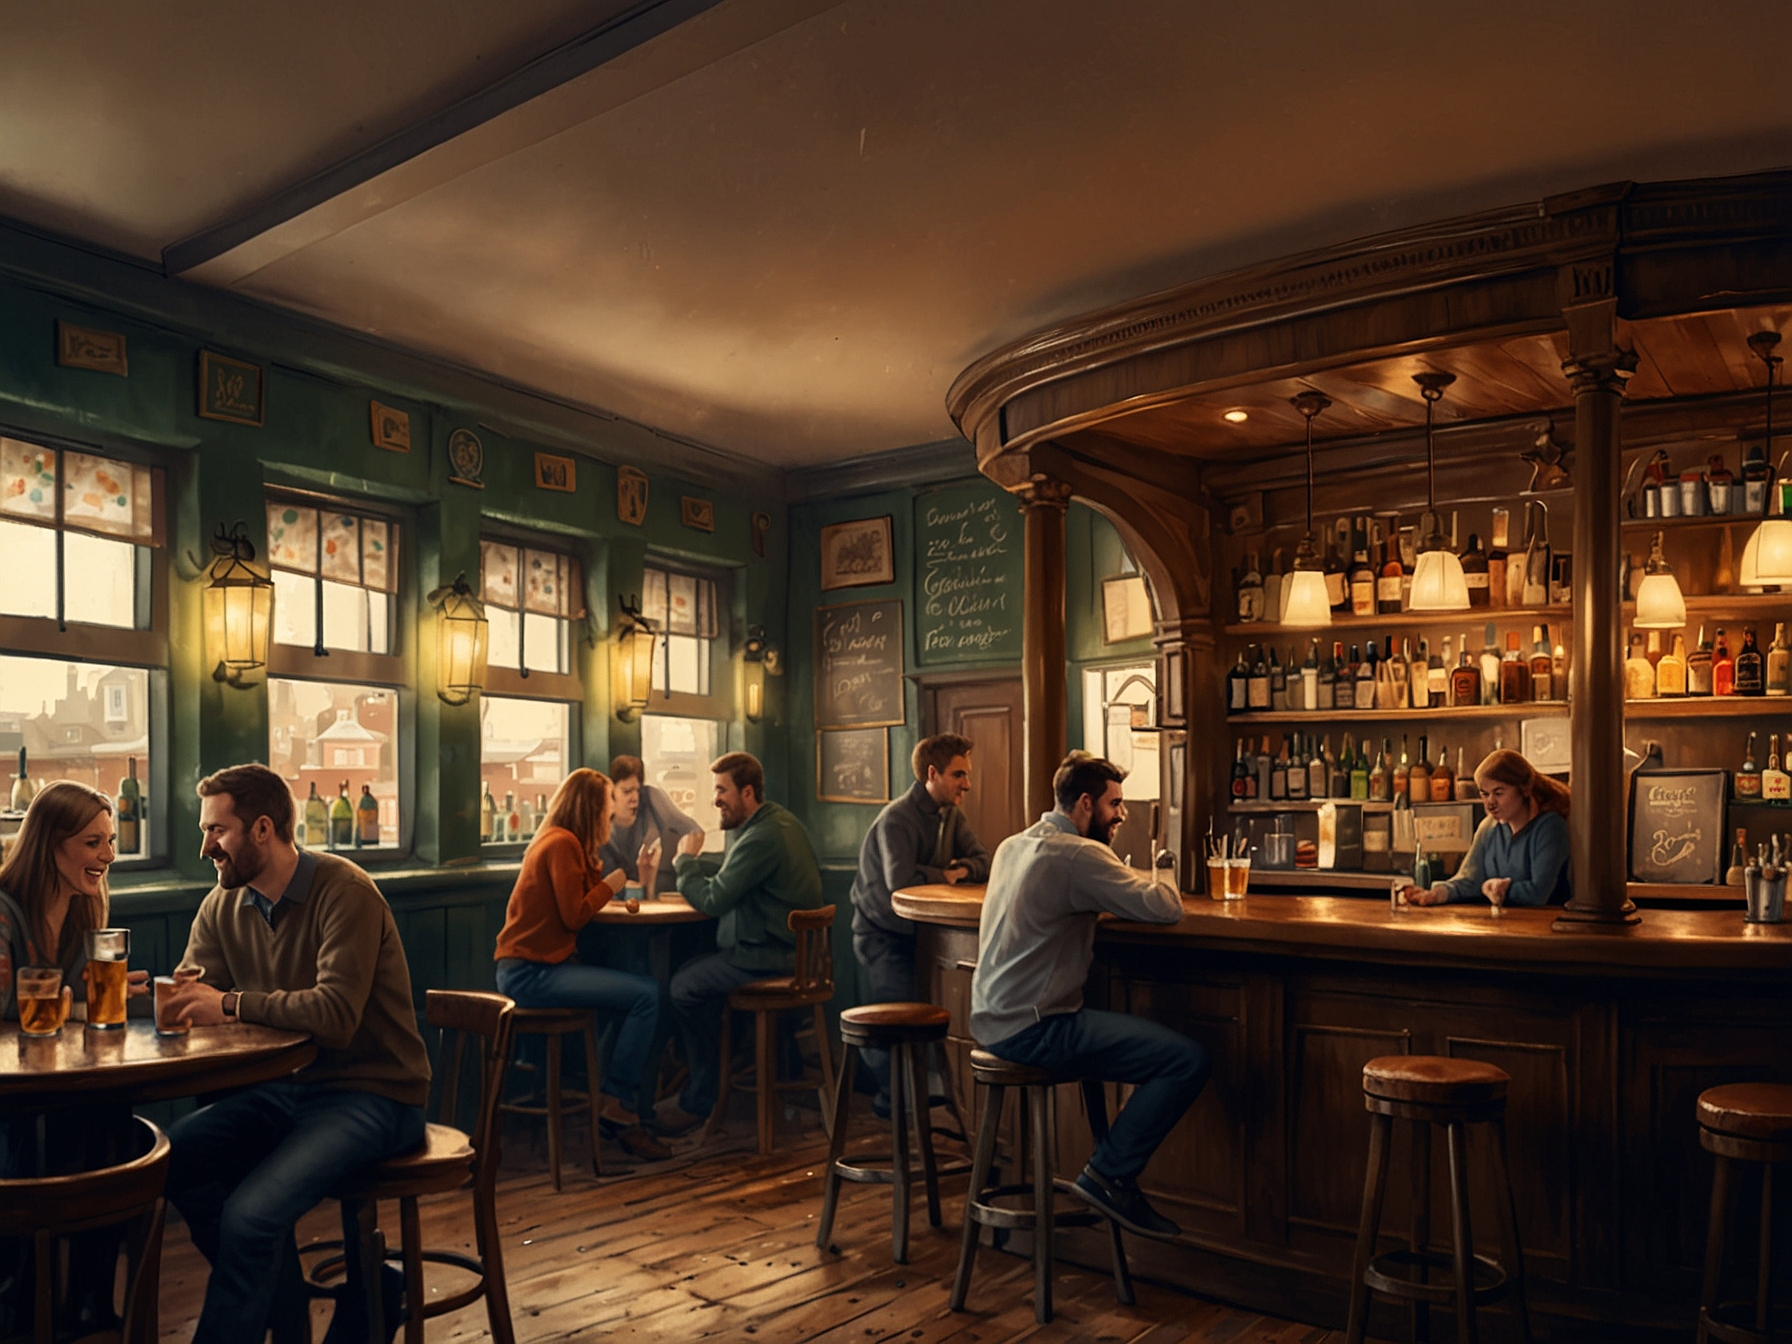 A lively bar scene featuring cozy pubs with patrons enjoying pints of £3 beers, showcasing the city's affordability and vibrant nightlife atmosphere.